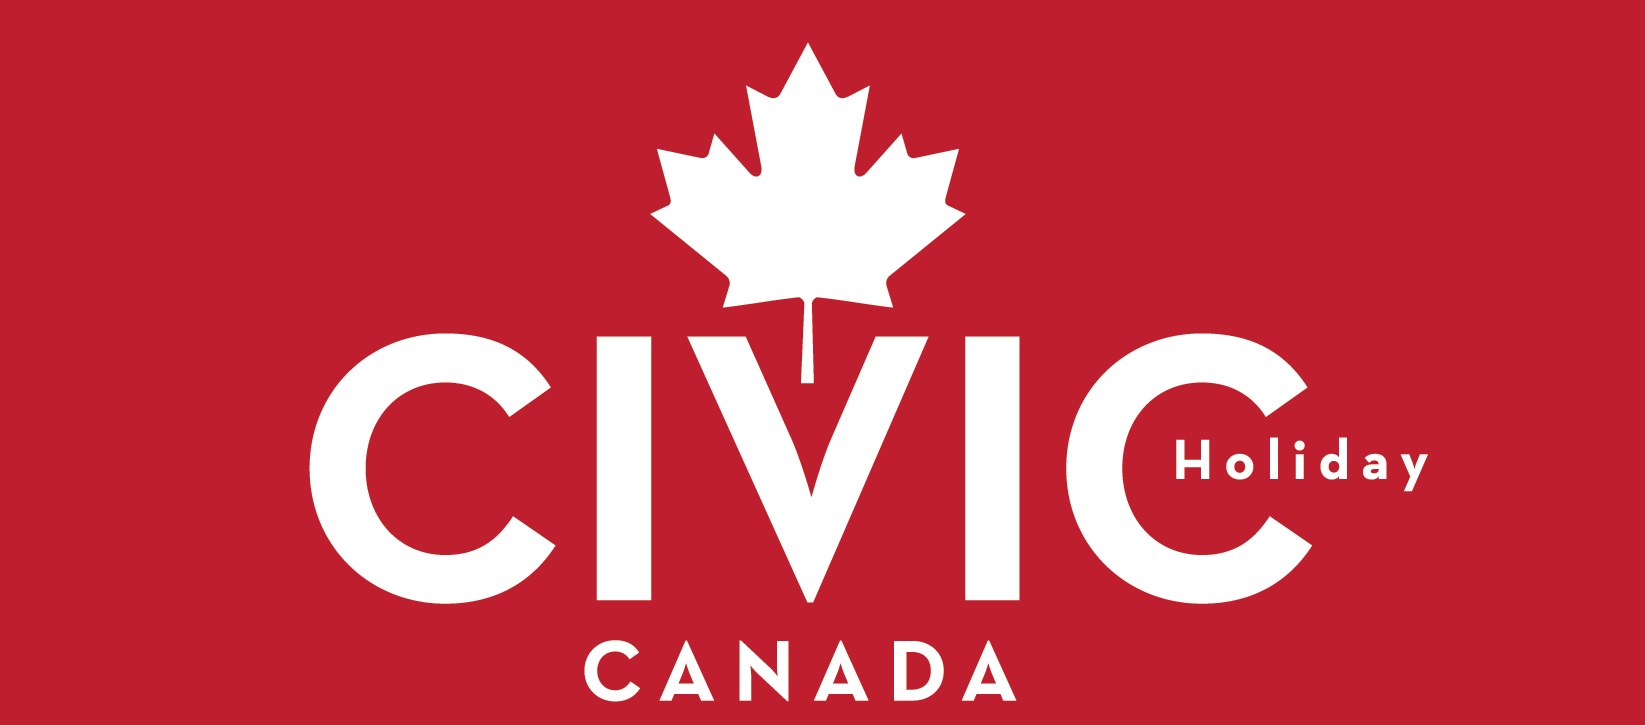 Civic Holiday Statutory Holidays in Canada Heritage Day